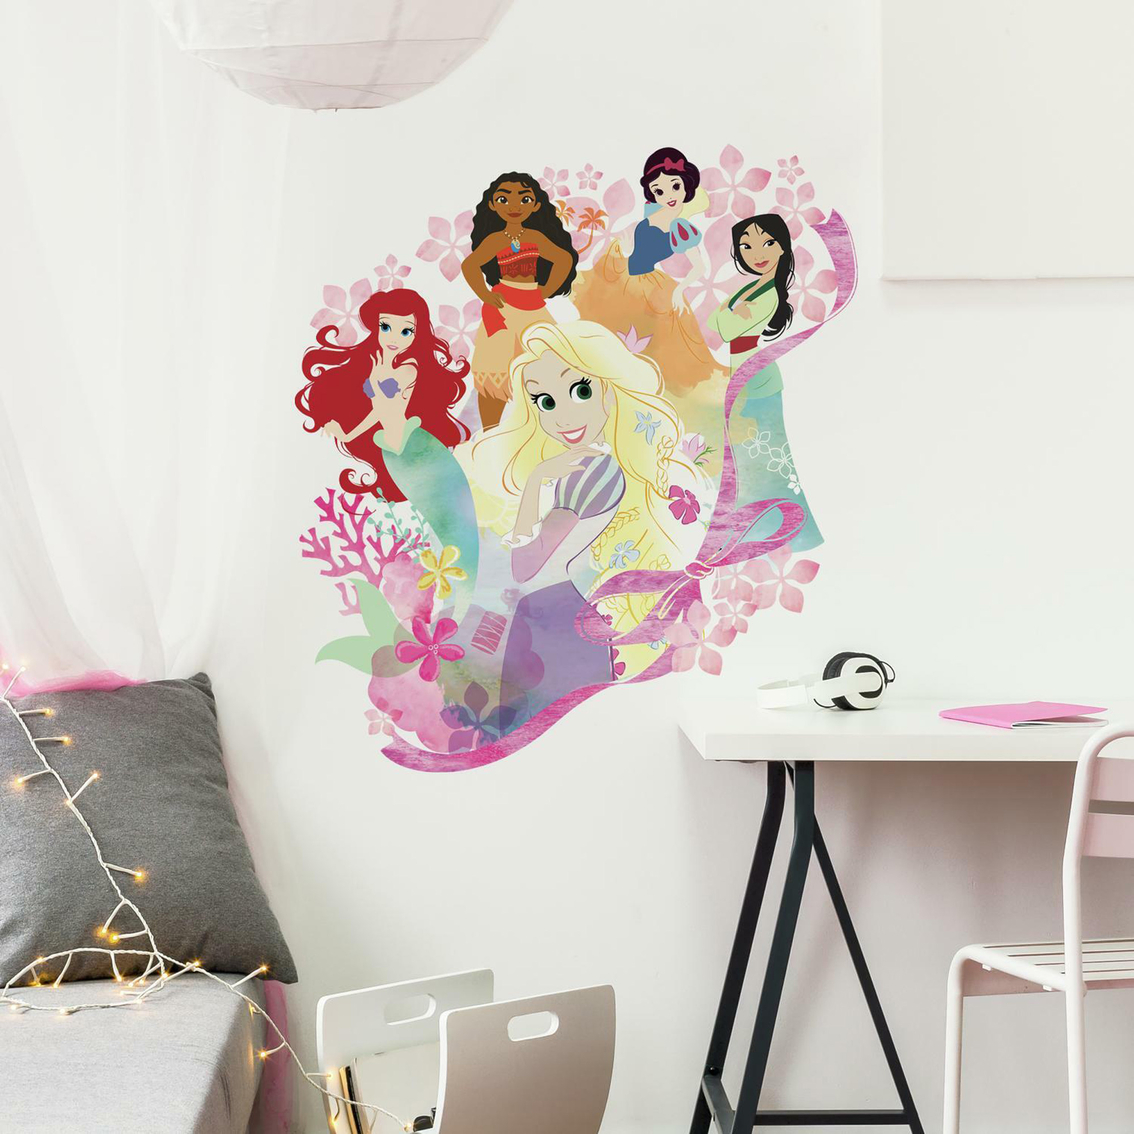 Roommates Princess Palace Gardens Peel And Stick Wall Decals - Image 2 of 6